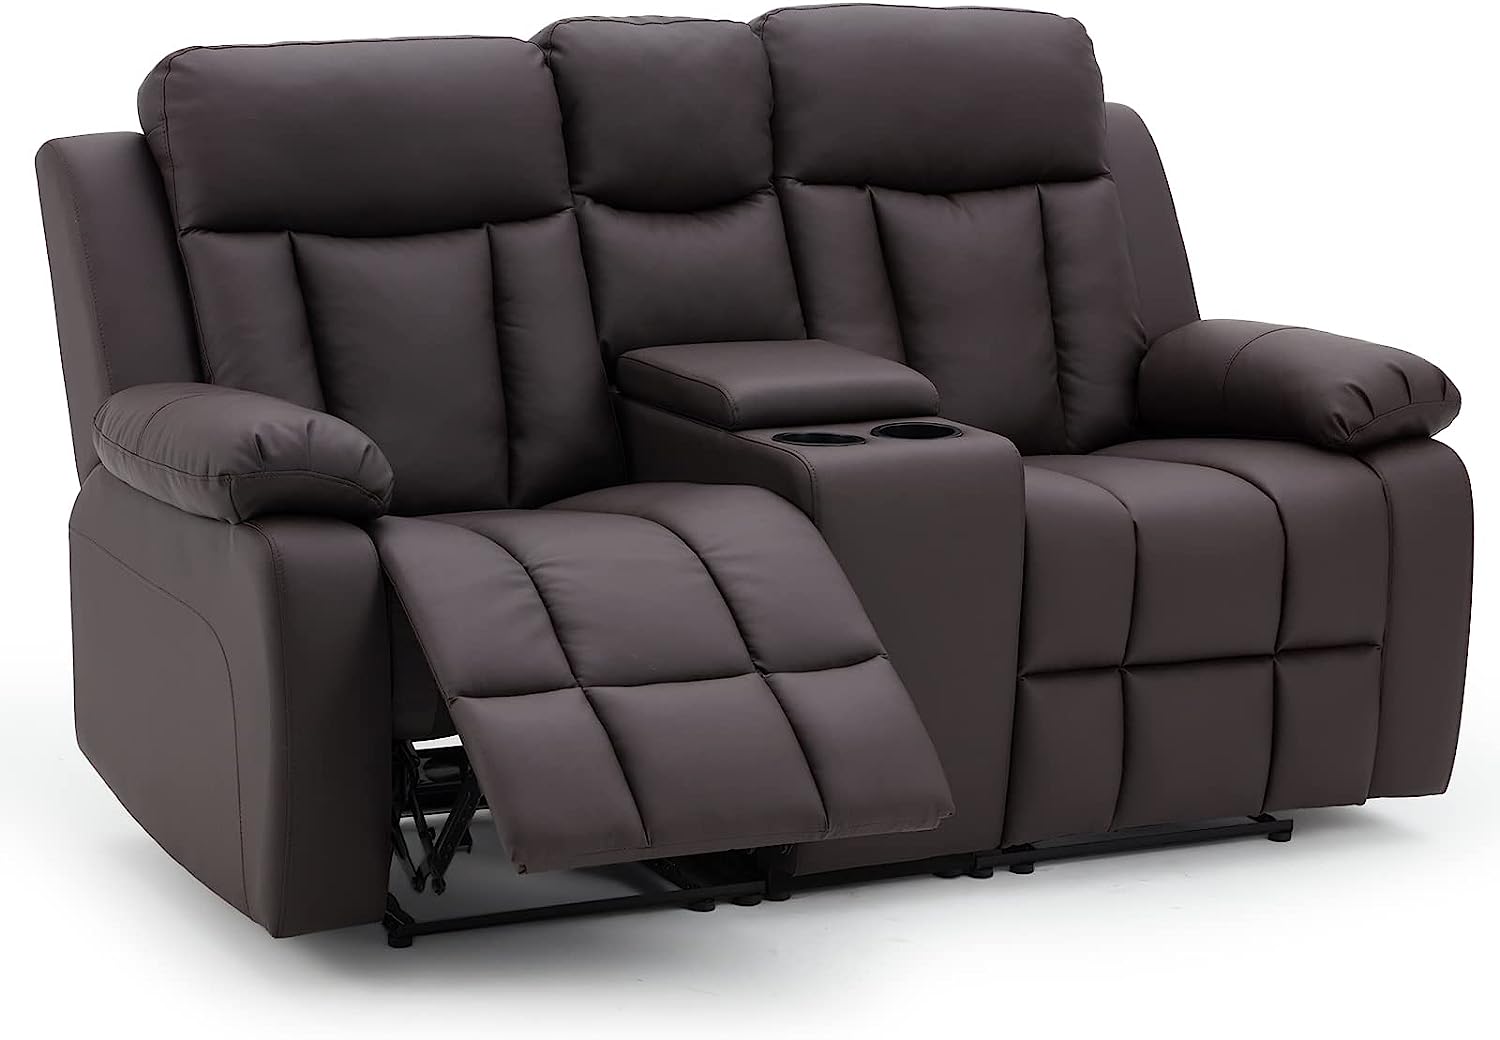 Vicluke PU Leather Fabric Recliner Loveseat Chair with [...]